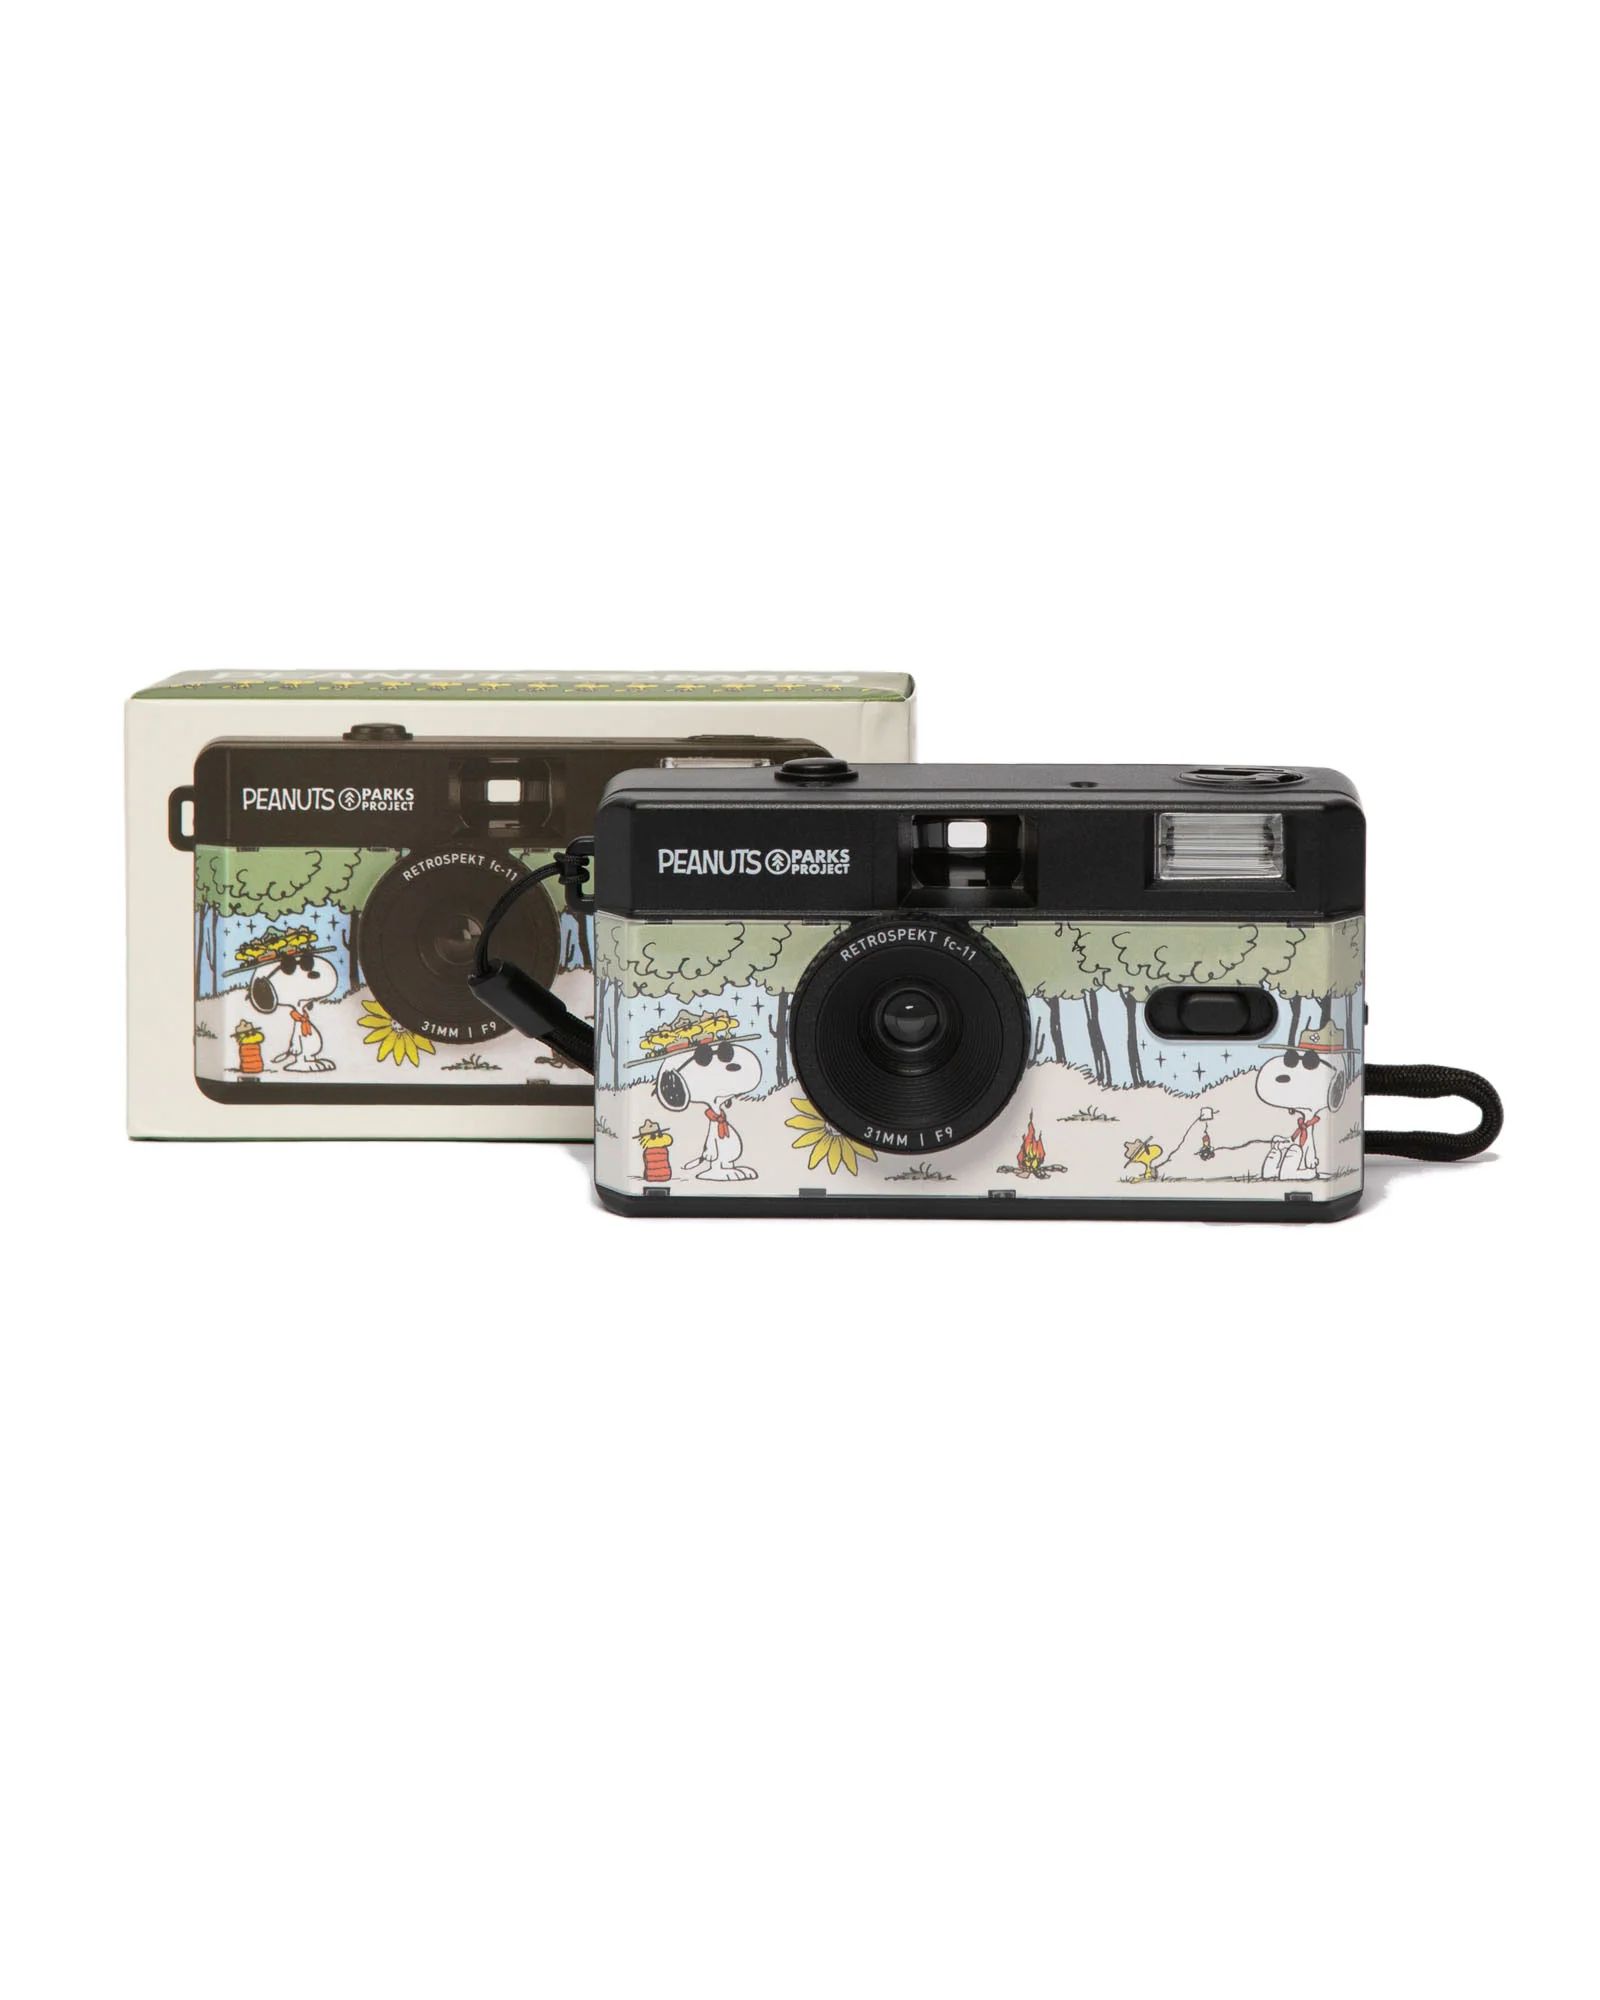 Peanuts x Parks Project 35mm Camera | Parks Project